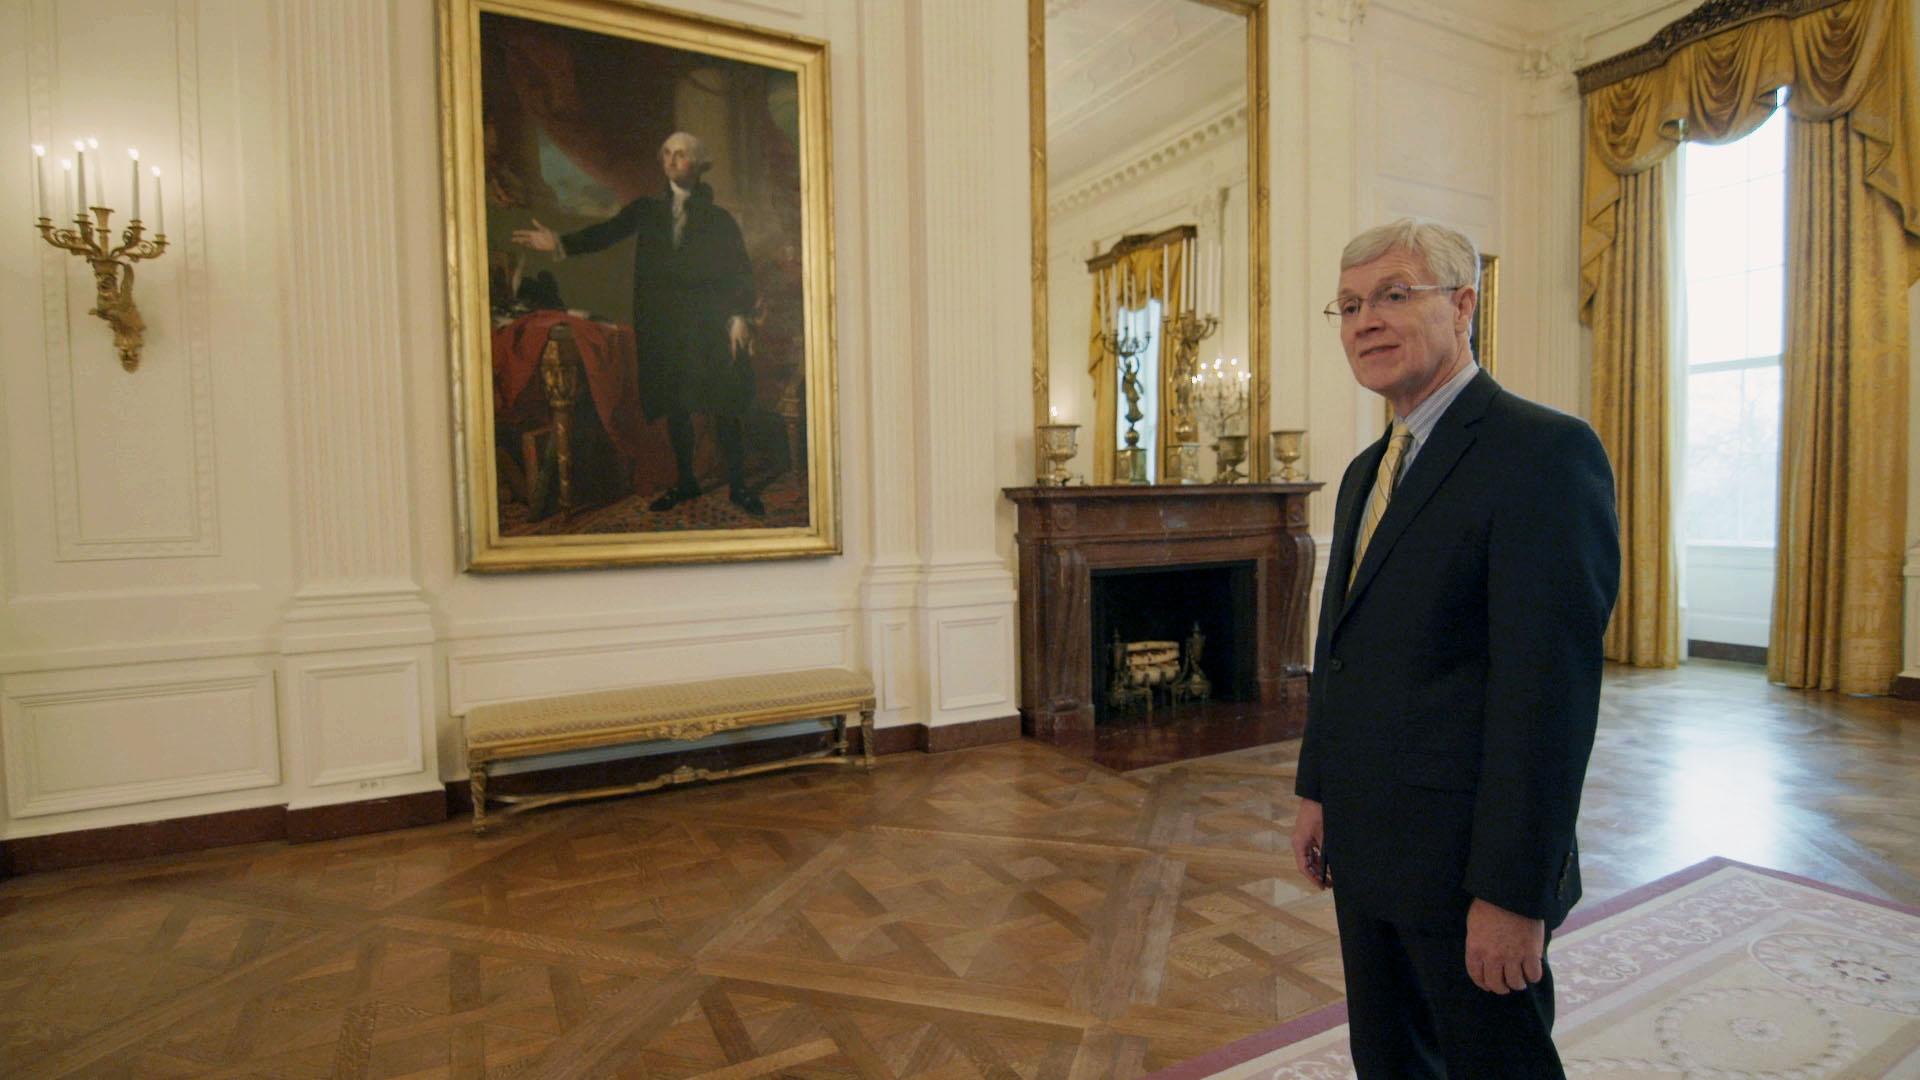 White House Curator Bill Allman stands in East Room of White House with George Washington portrait.